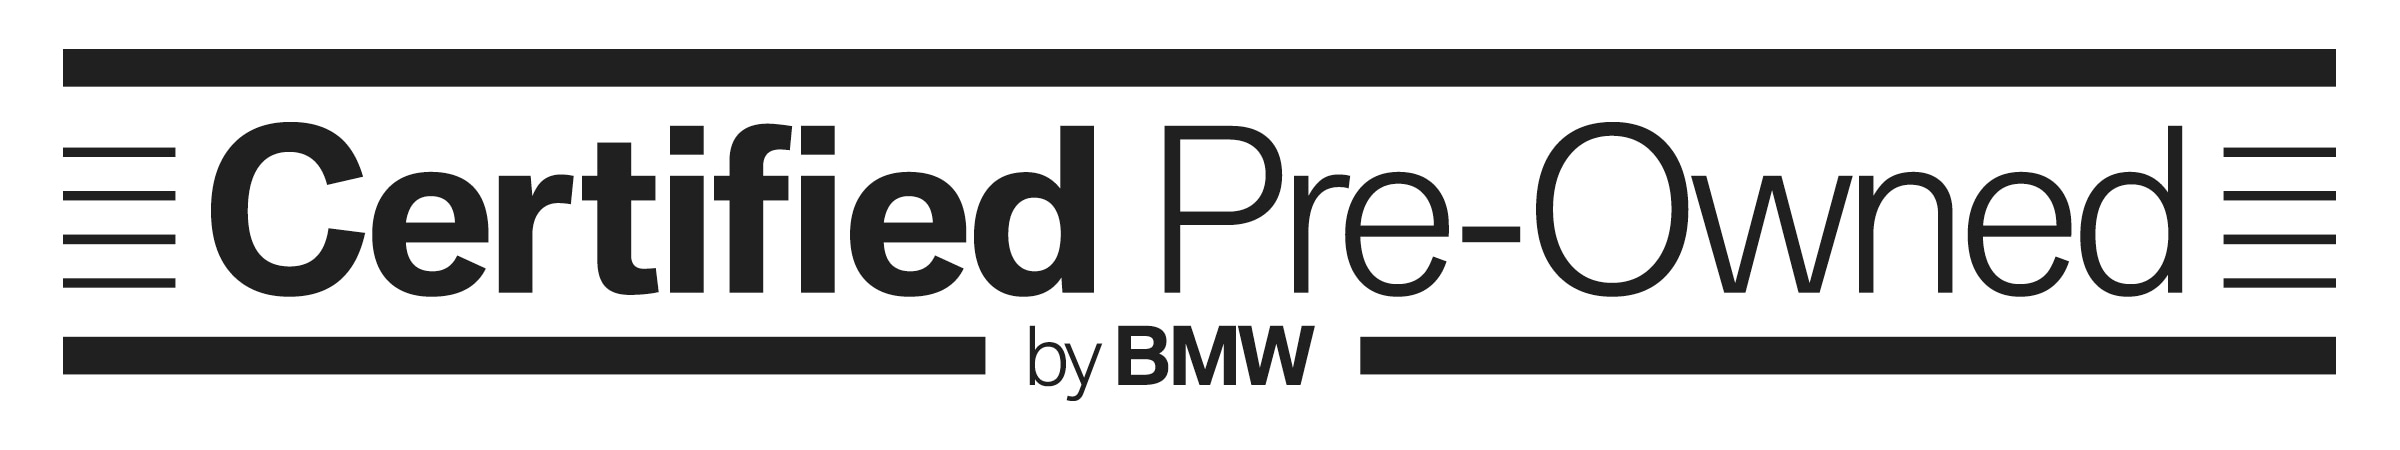 Bmw pre-owned certification #1